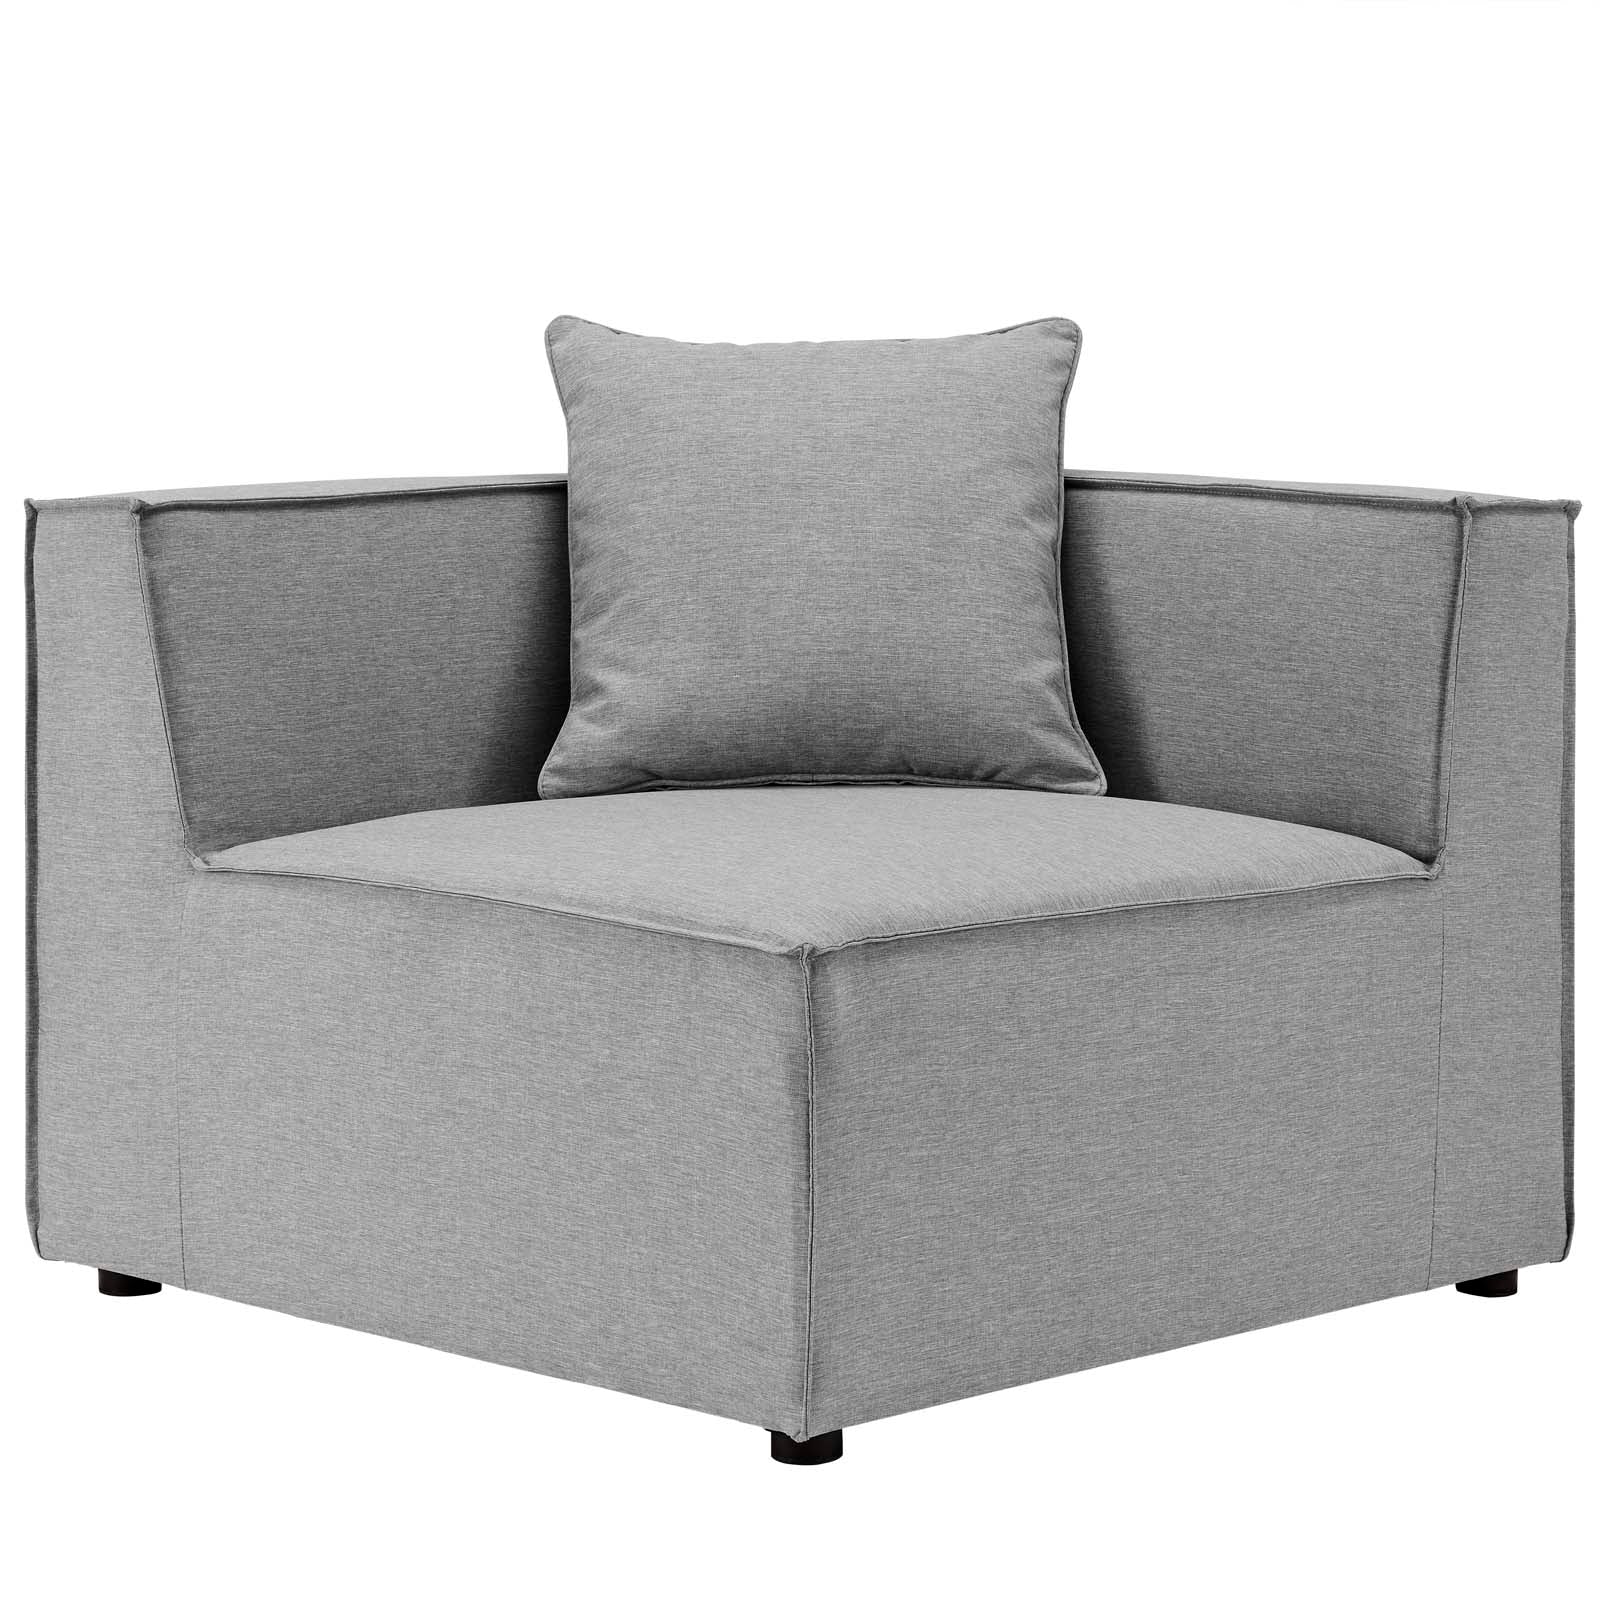 Saybrook Outdoor Patio Upholstered 8-Piece Sectional Sofa - East Shore Modern Home Furnishings